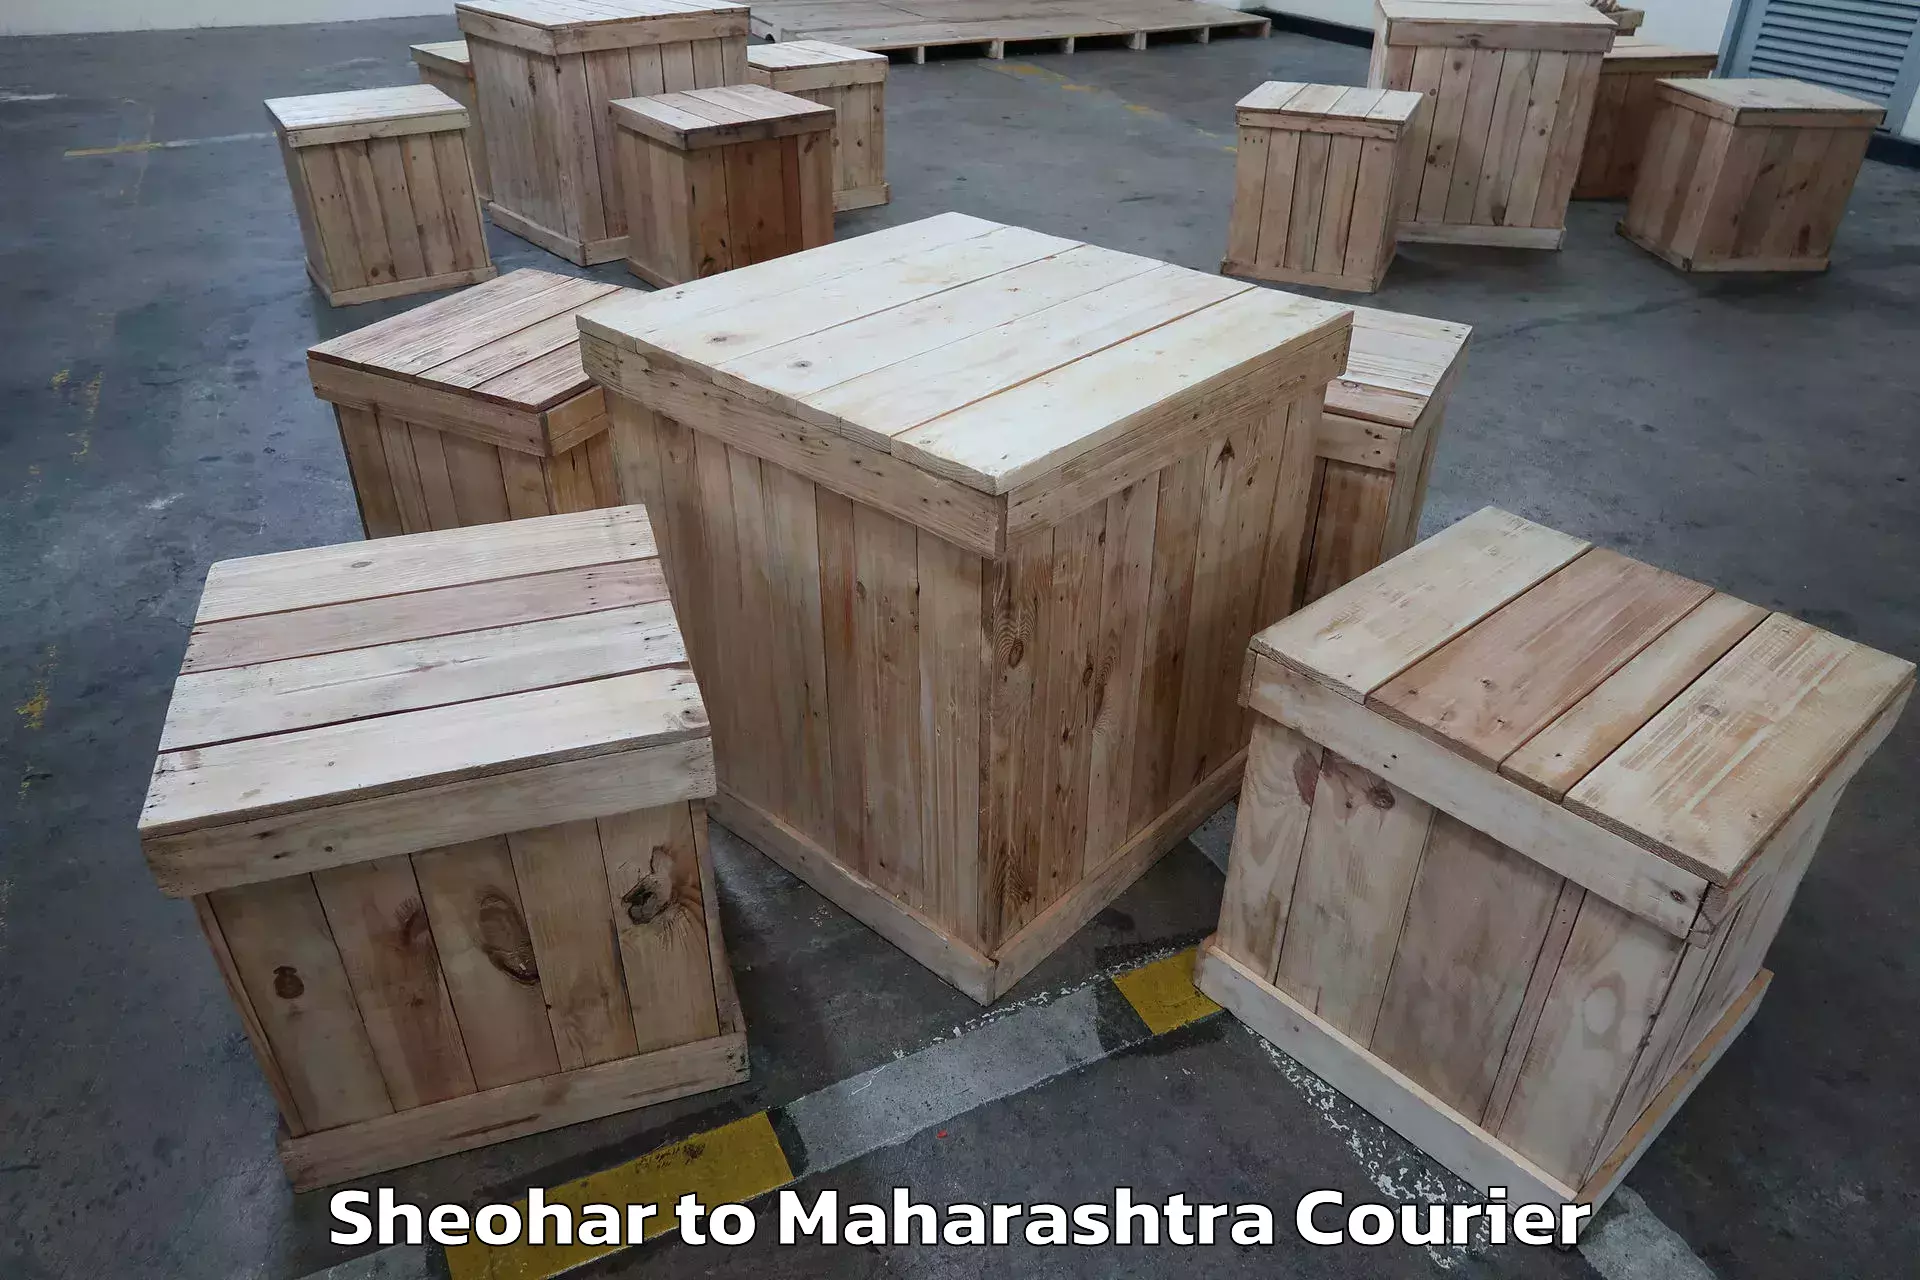 Trusted moving company Sheohar to Ganpatipule